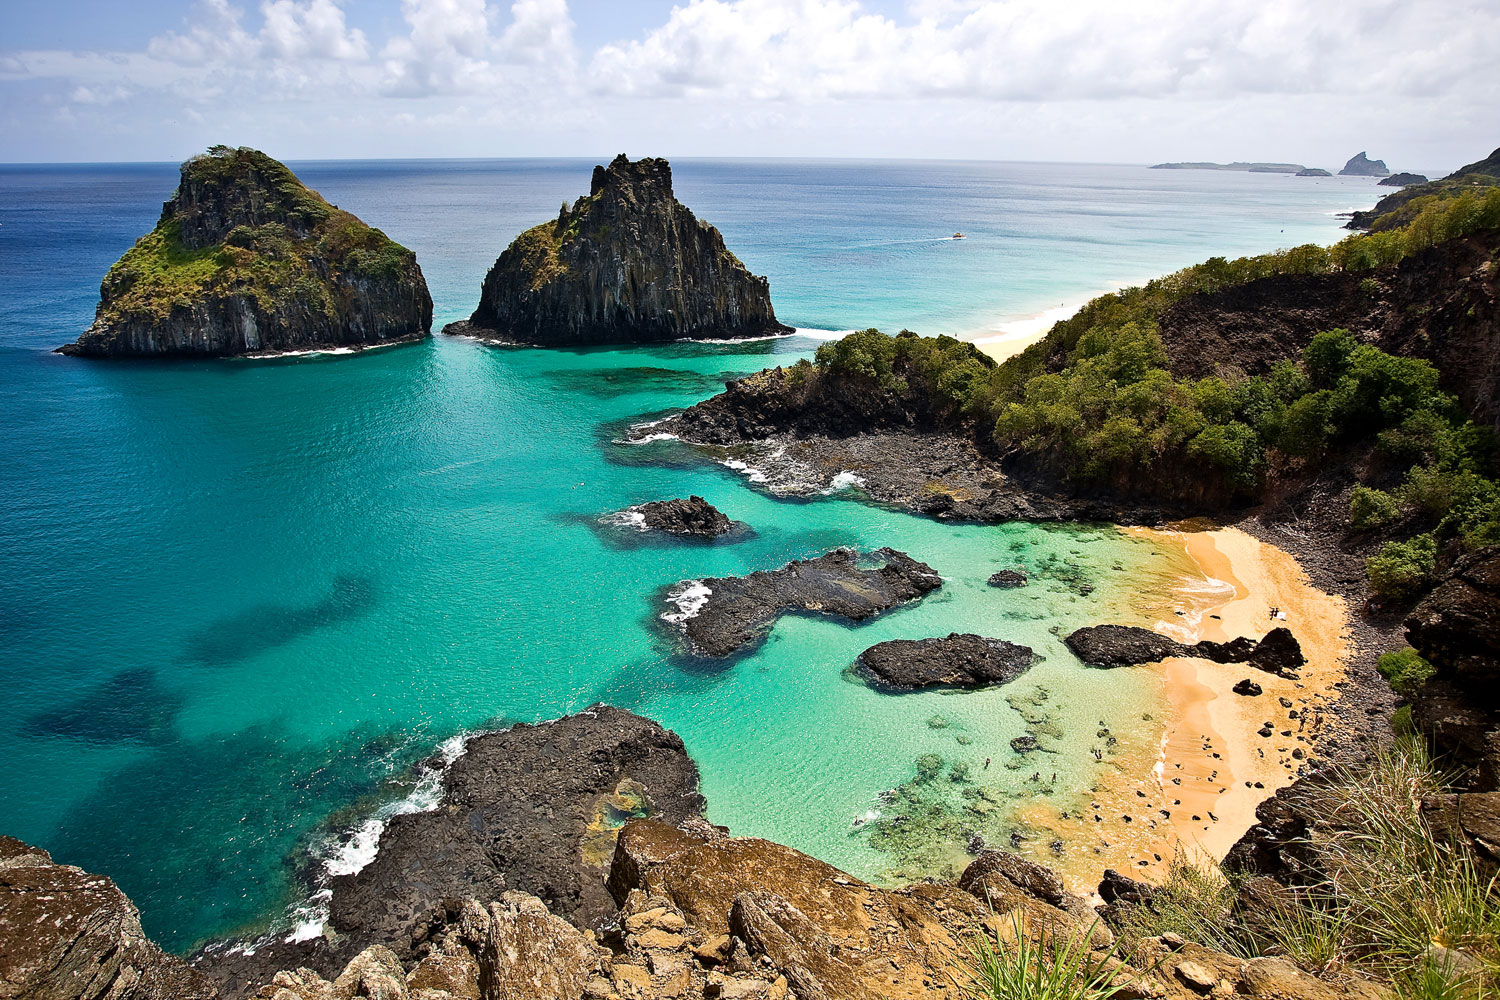 Fernando de Noronha, an archipelago of 21 islands about 200 miles off the Brazilian coast, is designated by UNESCO as a World Heritage Site and offers travelers stunning views of marine life.